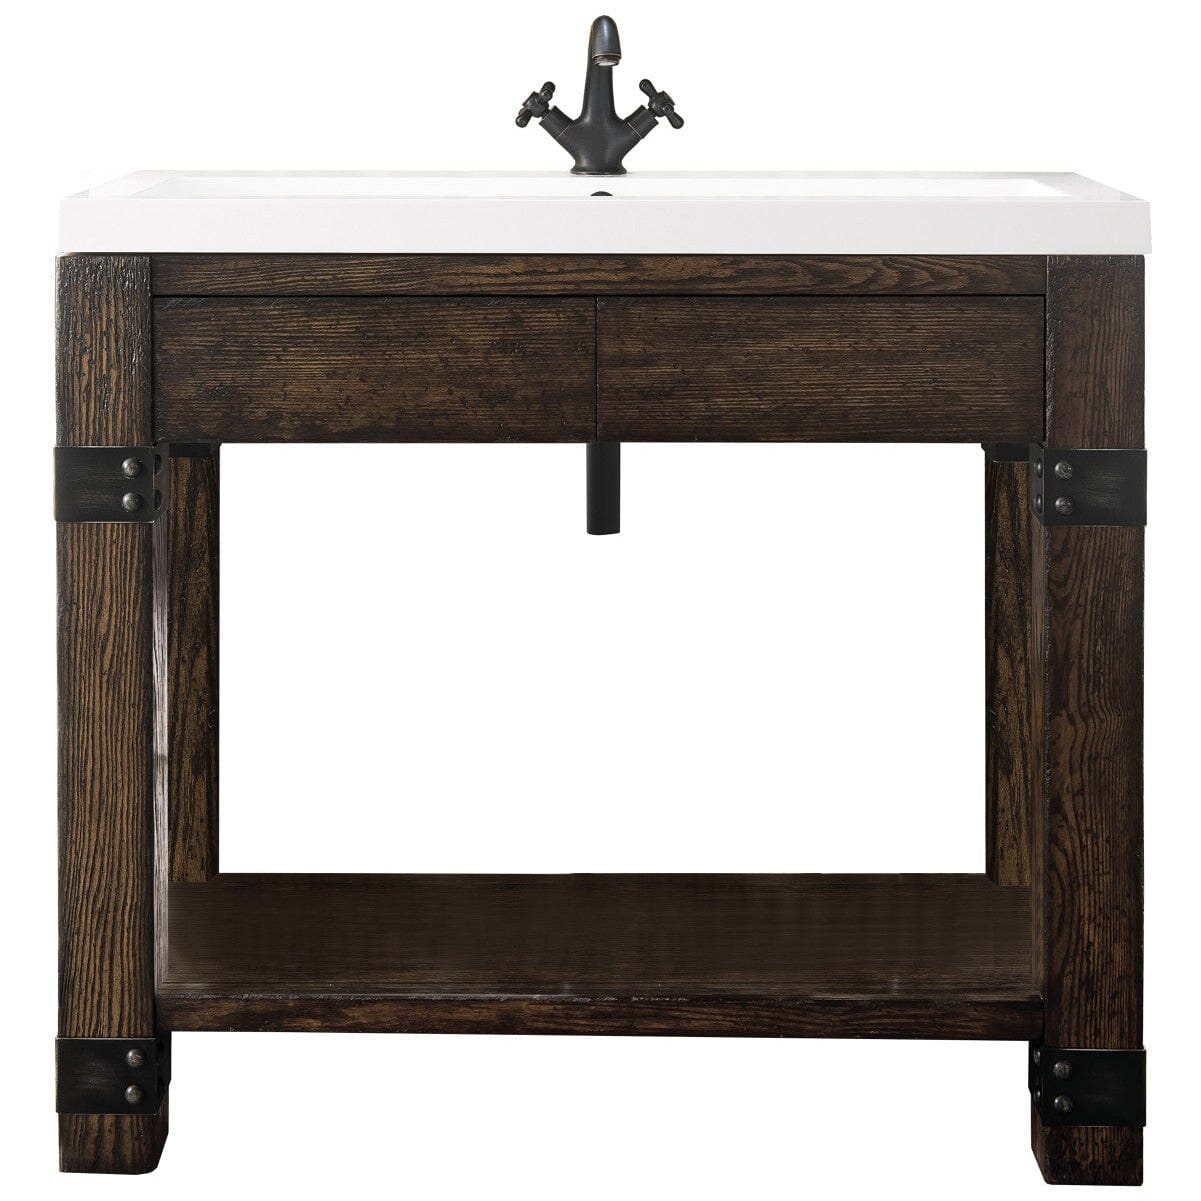 James Martin Brooklyn 39.5" Wooden Sink Console Console James Martin Rustic Ash w/ White Glossy Composite Countertop 